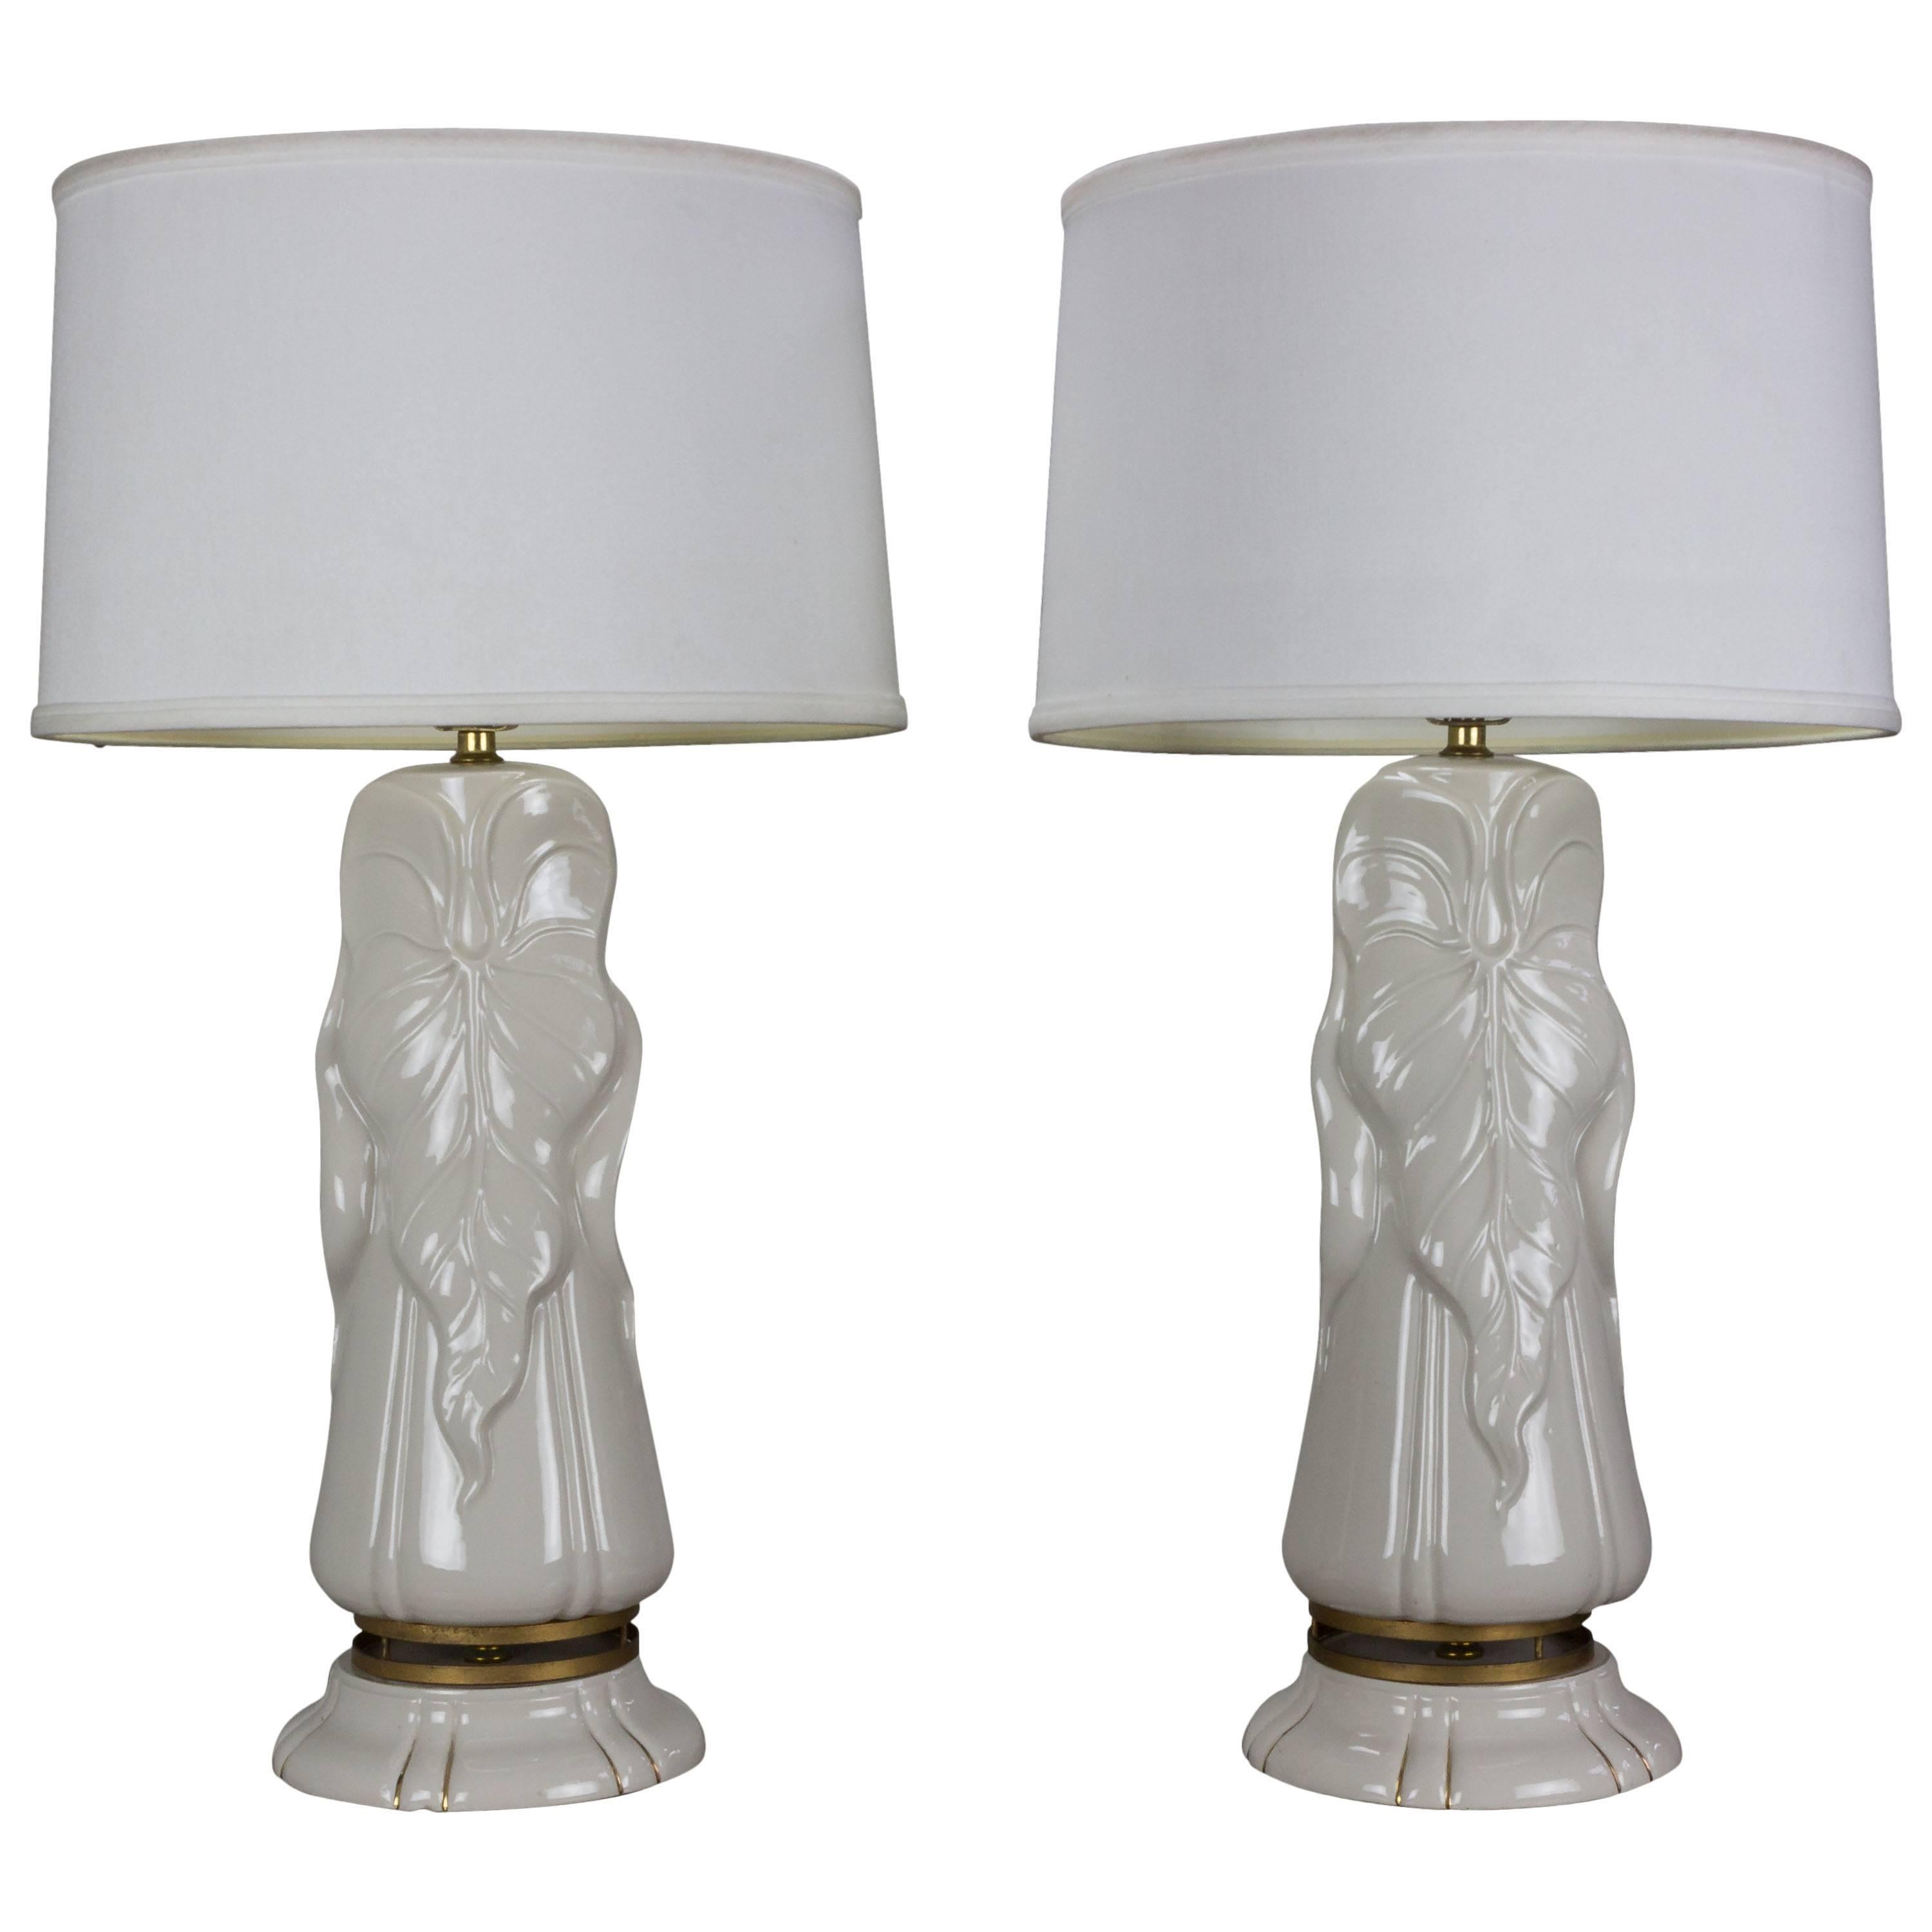 Pair of 1940s Hollywood Glam White Ceramic Lamps With Gold Metal Trim For Sale